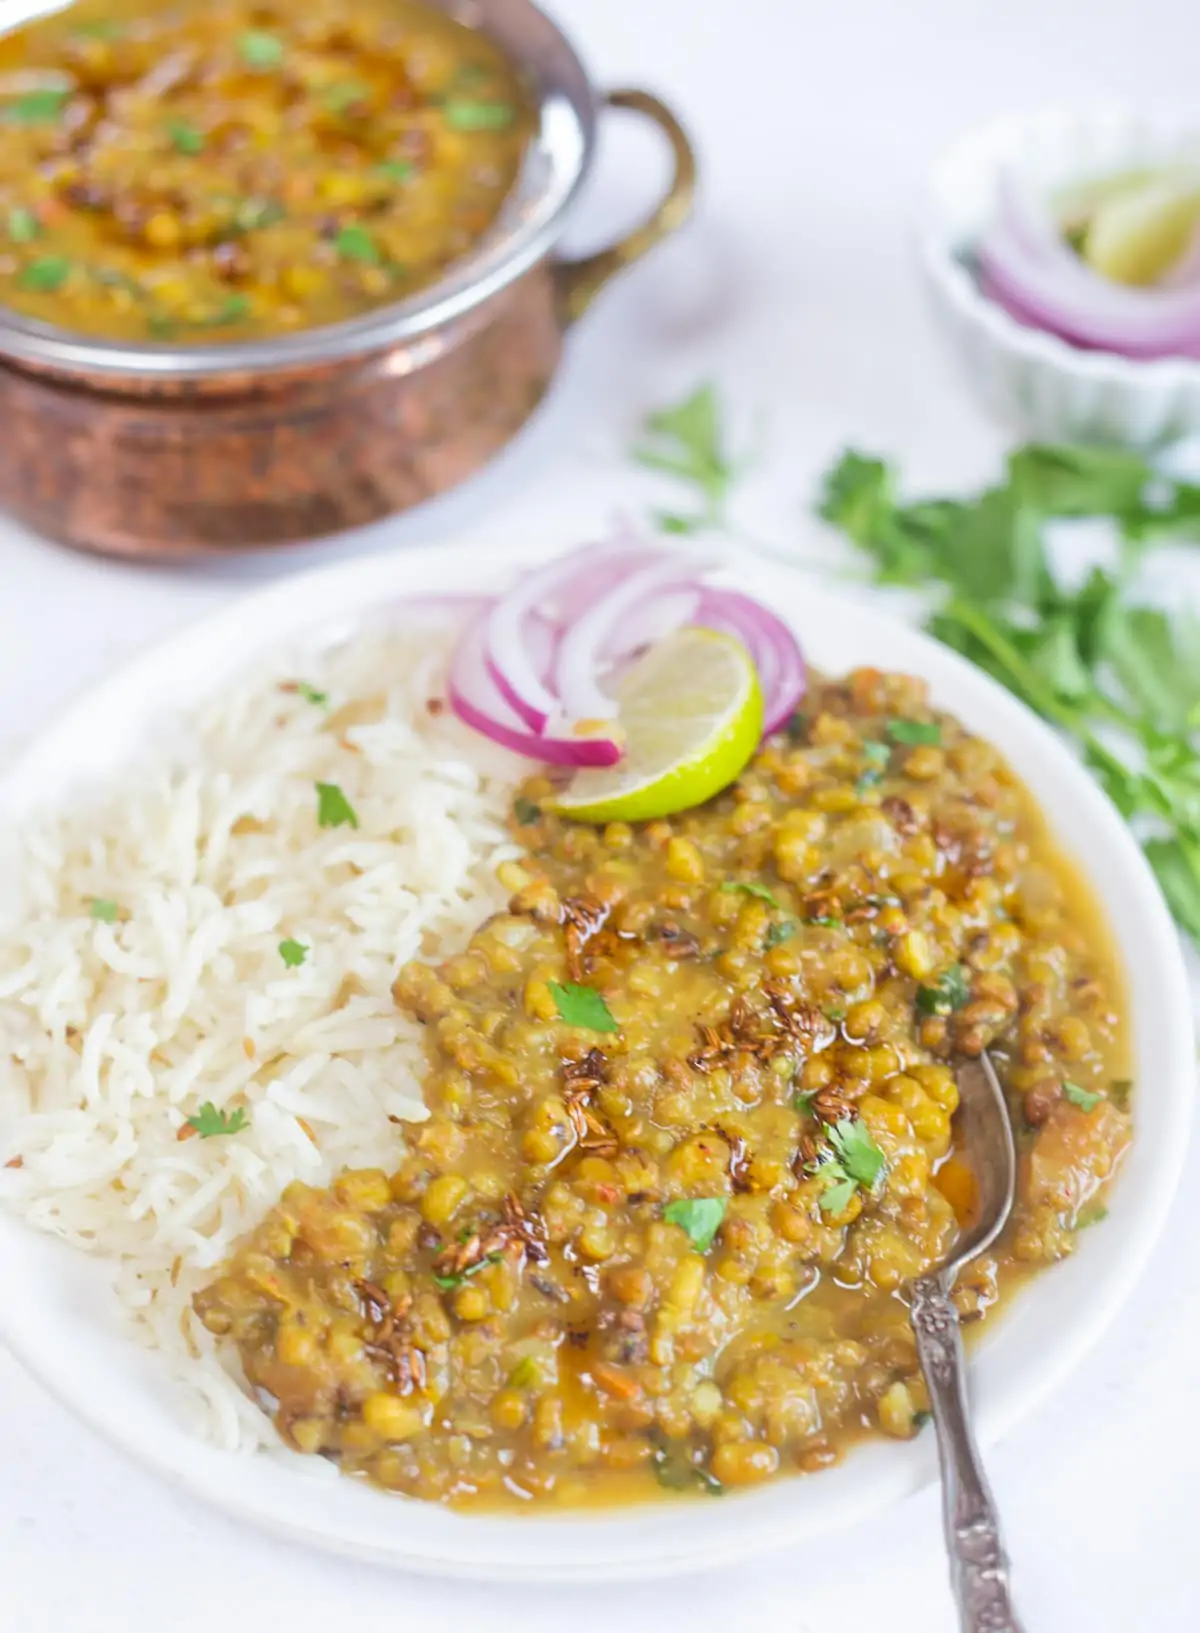 Green Moong Dal with rice topped with a tempering of ghee and cumin seeds